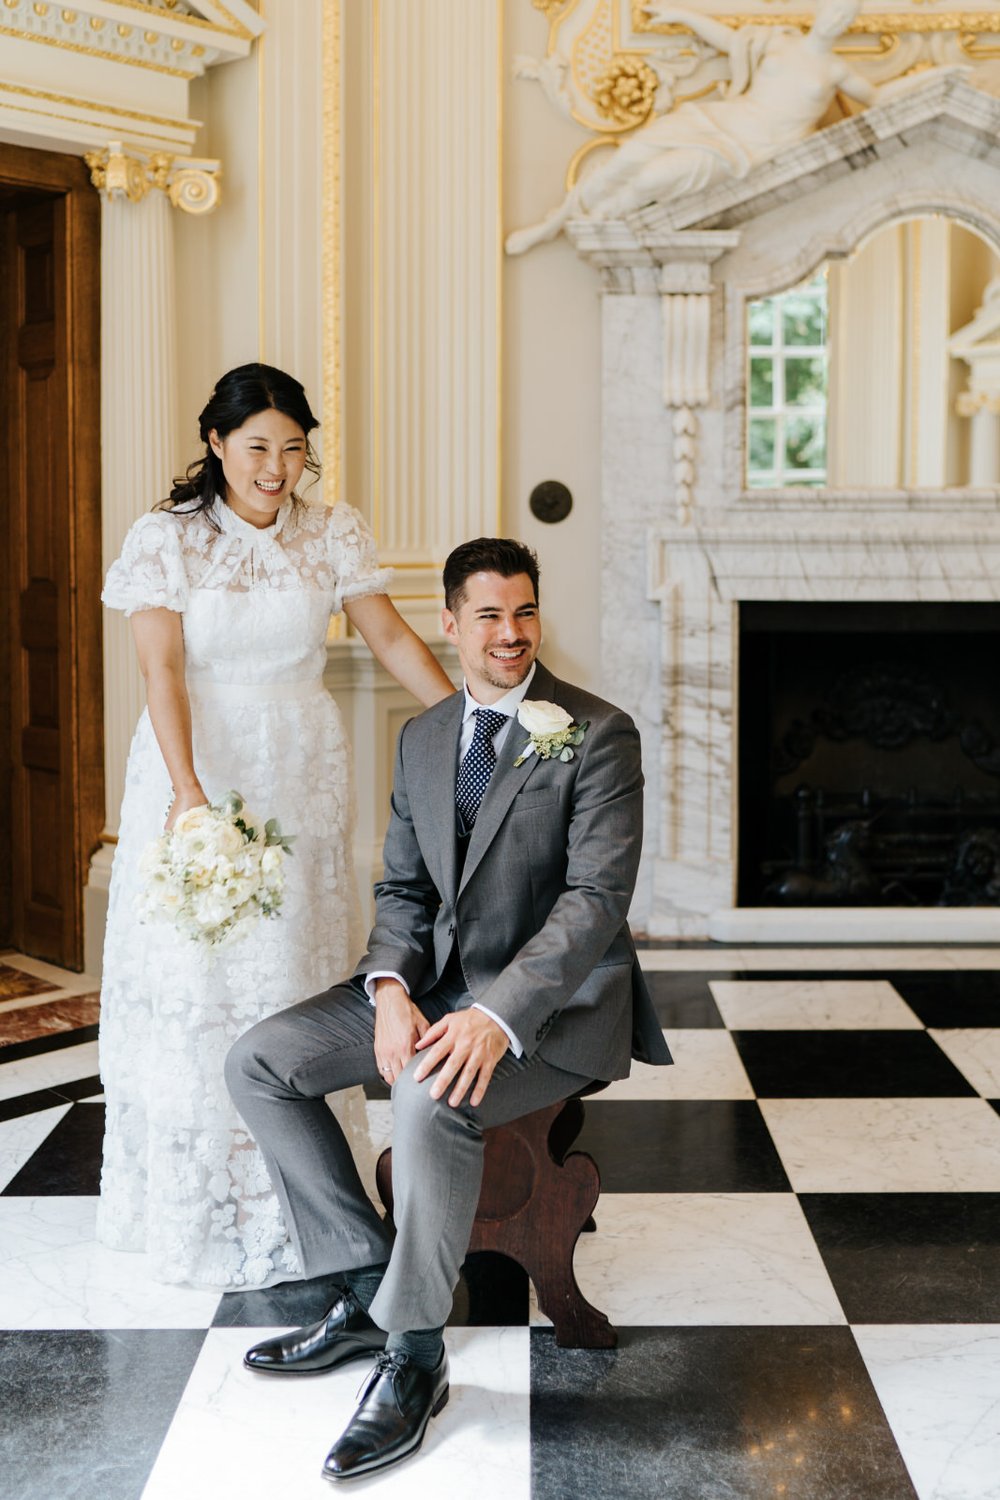 Groom sits on a chair as Korean bride stands next to him in wedding portrait at Orleans House Gallery